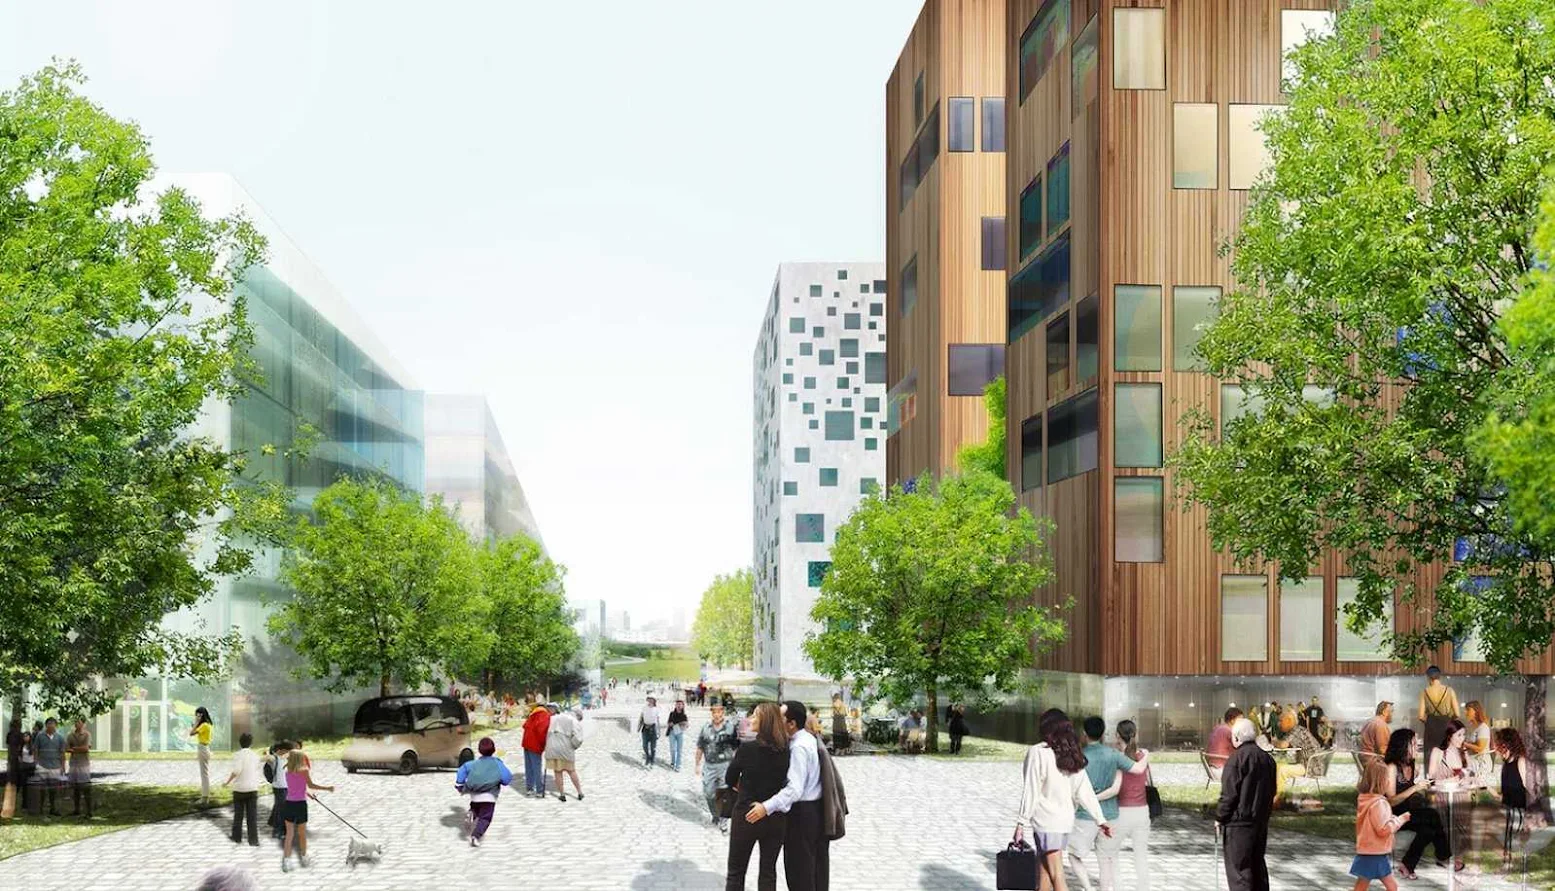 04 Urban Plan for Stavanger by MVRDV and Space Group